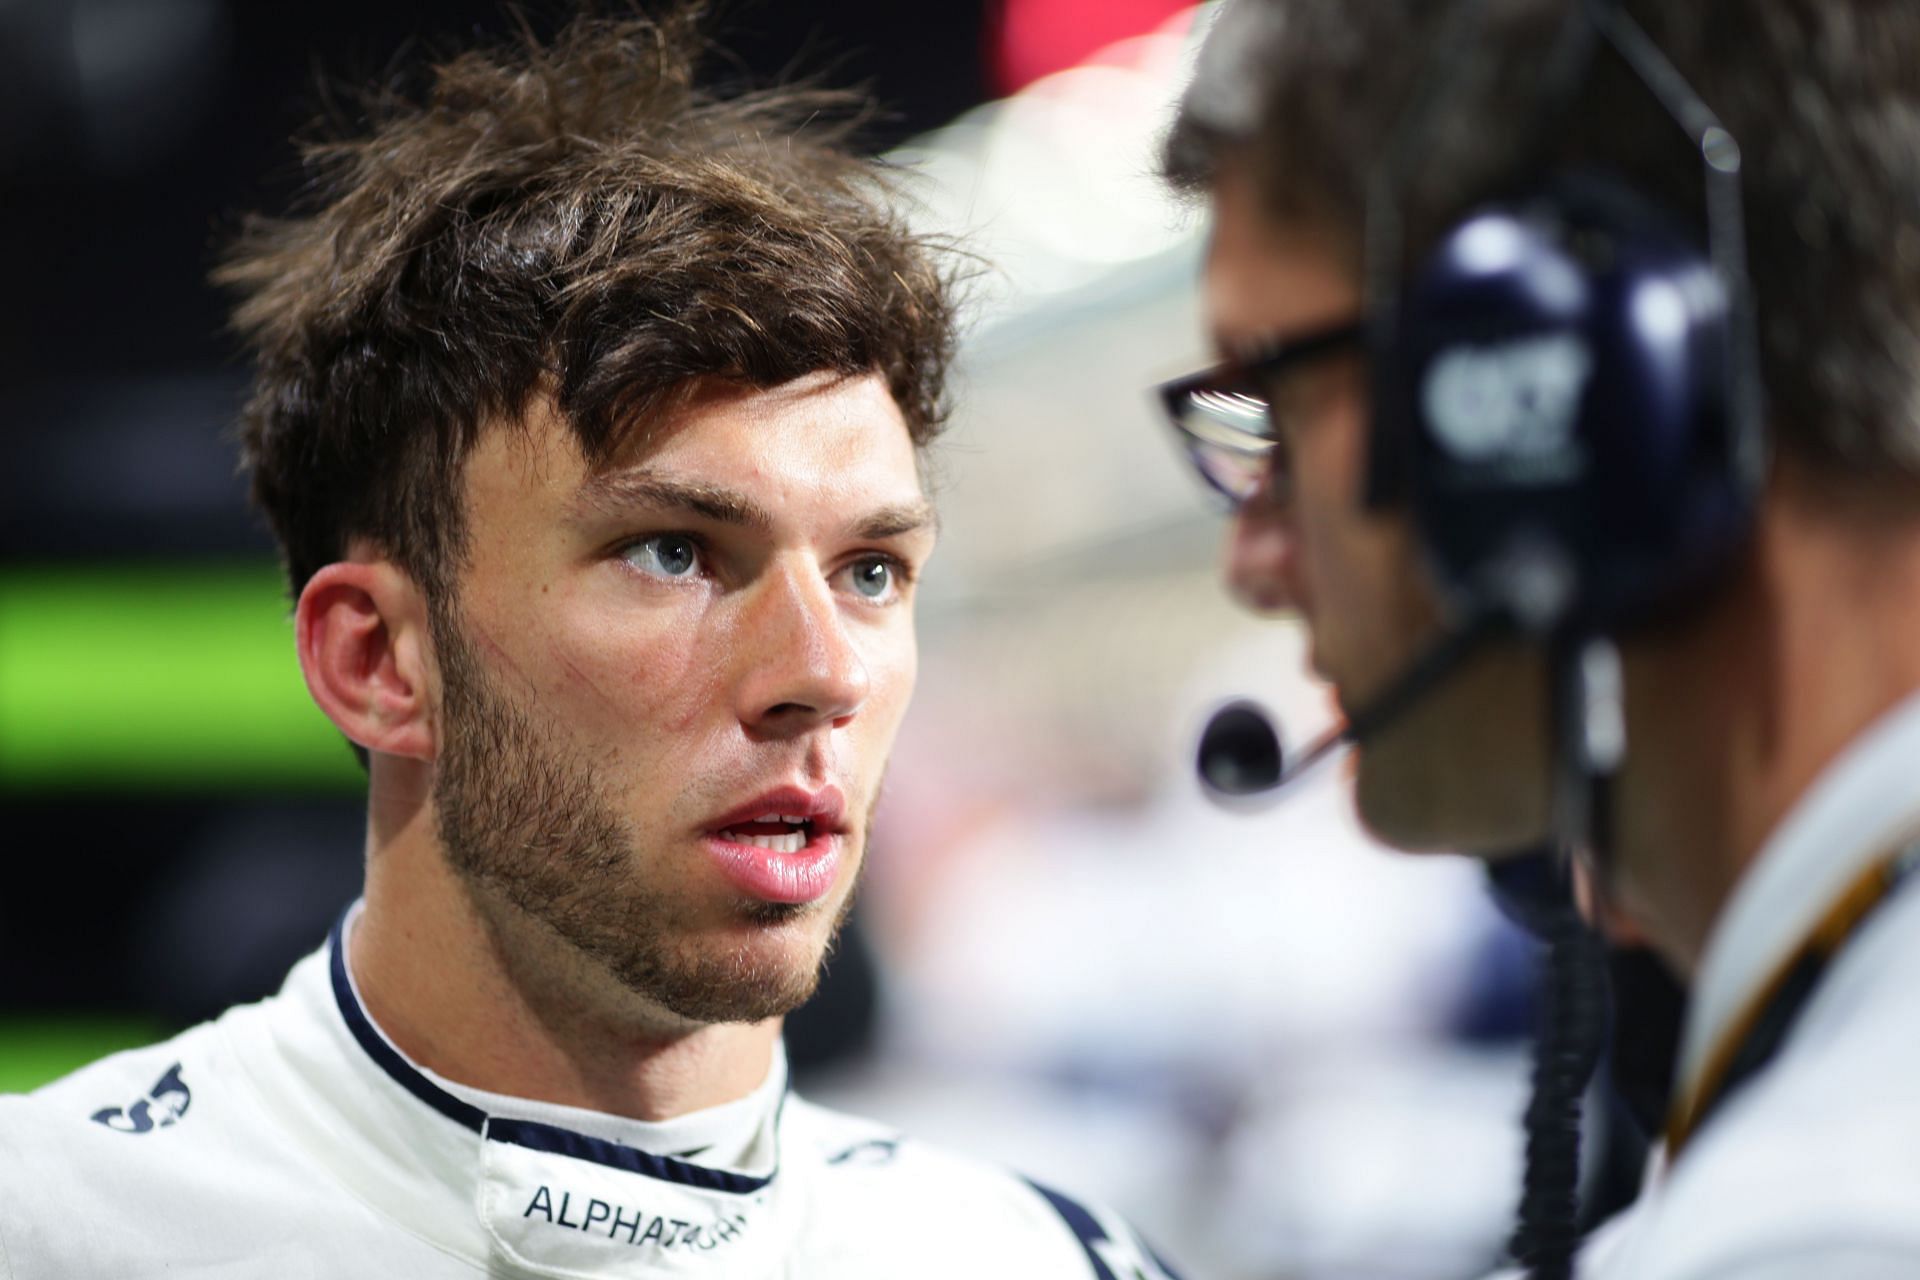 Pierre Gasly respects the straightforward nature of Helmut Marko when it comes to dealing with situations